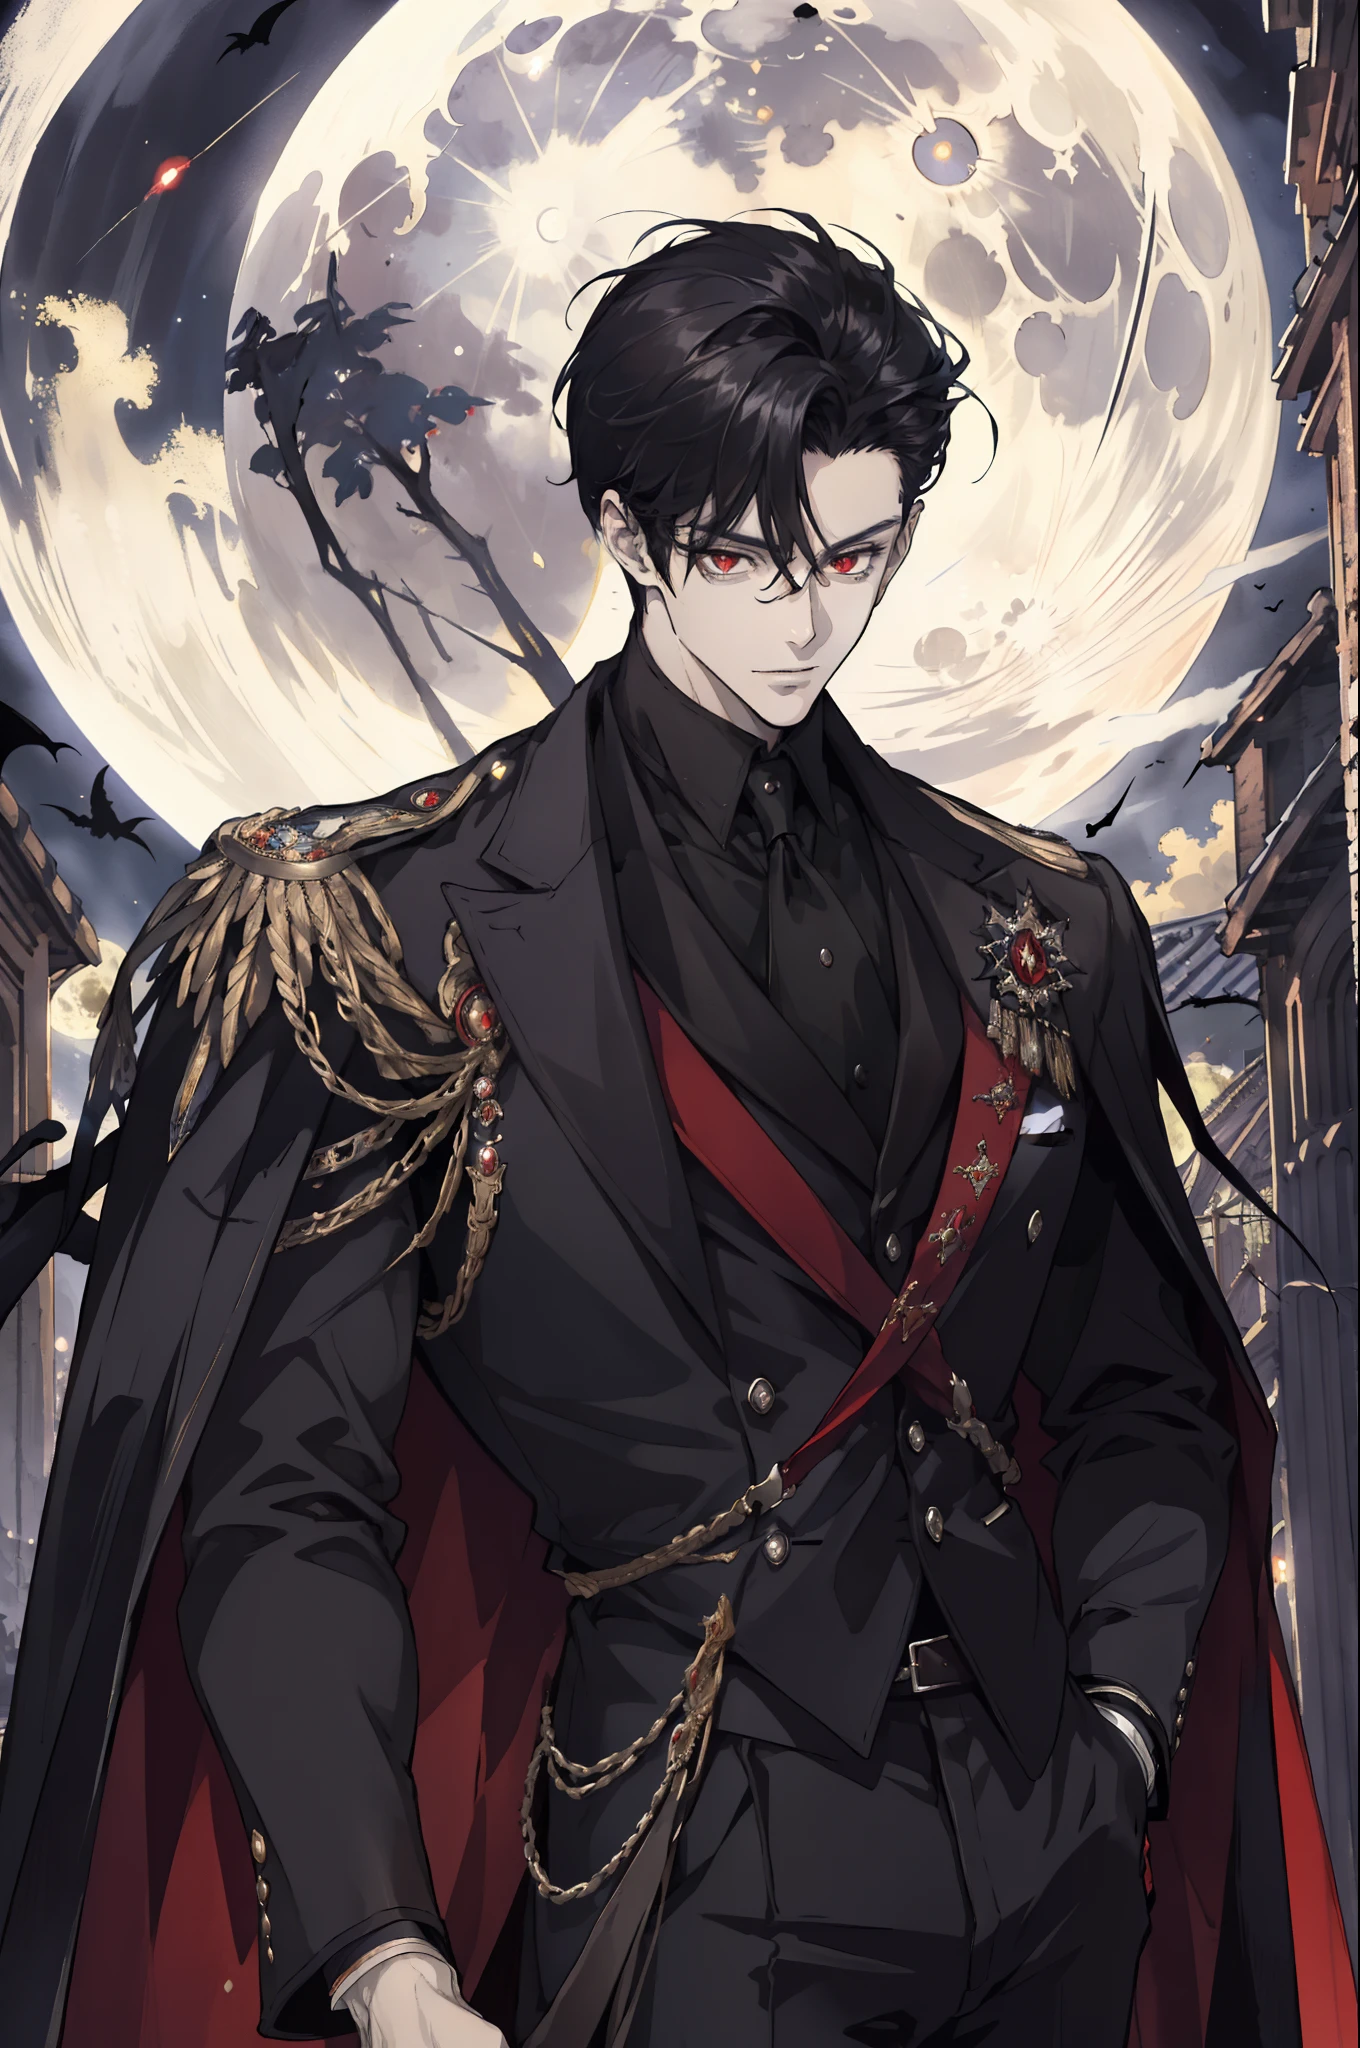 (absurdres, highres, ultra detailed), 1 male, adult, male focus, handsome, handsome, tall muscular guy, broad shoulders, finely detailed eyes and detailed face, short black hair, red eyes, handsome, black suit, fantasy, uniform, royal, behind him is a full moon, This is what a real Vampire looks like! Antique vampire clothes, elegant, gentlemanly. He is smiling friendly, In the background a brown church window, with moonlight reflecting behind. All this is in a beautiful and dark light, which makes it look amazing. 4k wallpaper (High quality: 1.2, Church at night: 1.5, Antique Vampire Clothing: 1.4) (((At night))) (Provocative light, mysterious darkness) (((Full Moon))) Defined Face) Perfect Hands)Fantastic light and shadow, Scenery, portrait